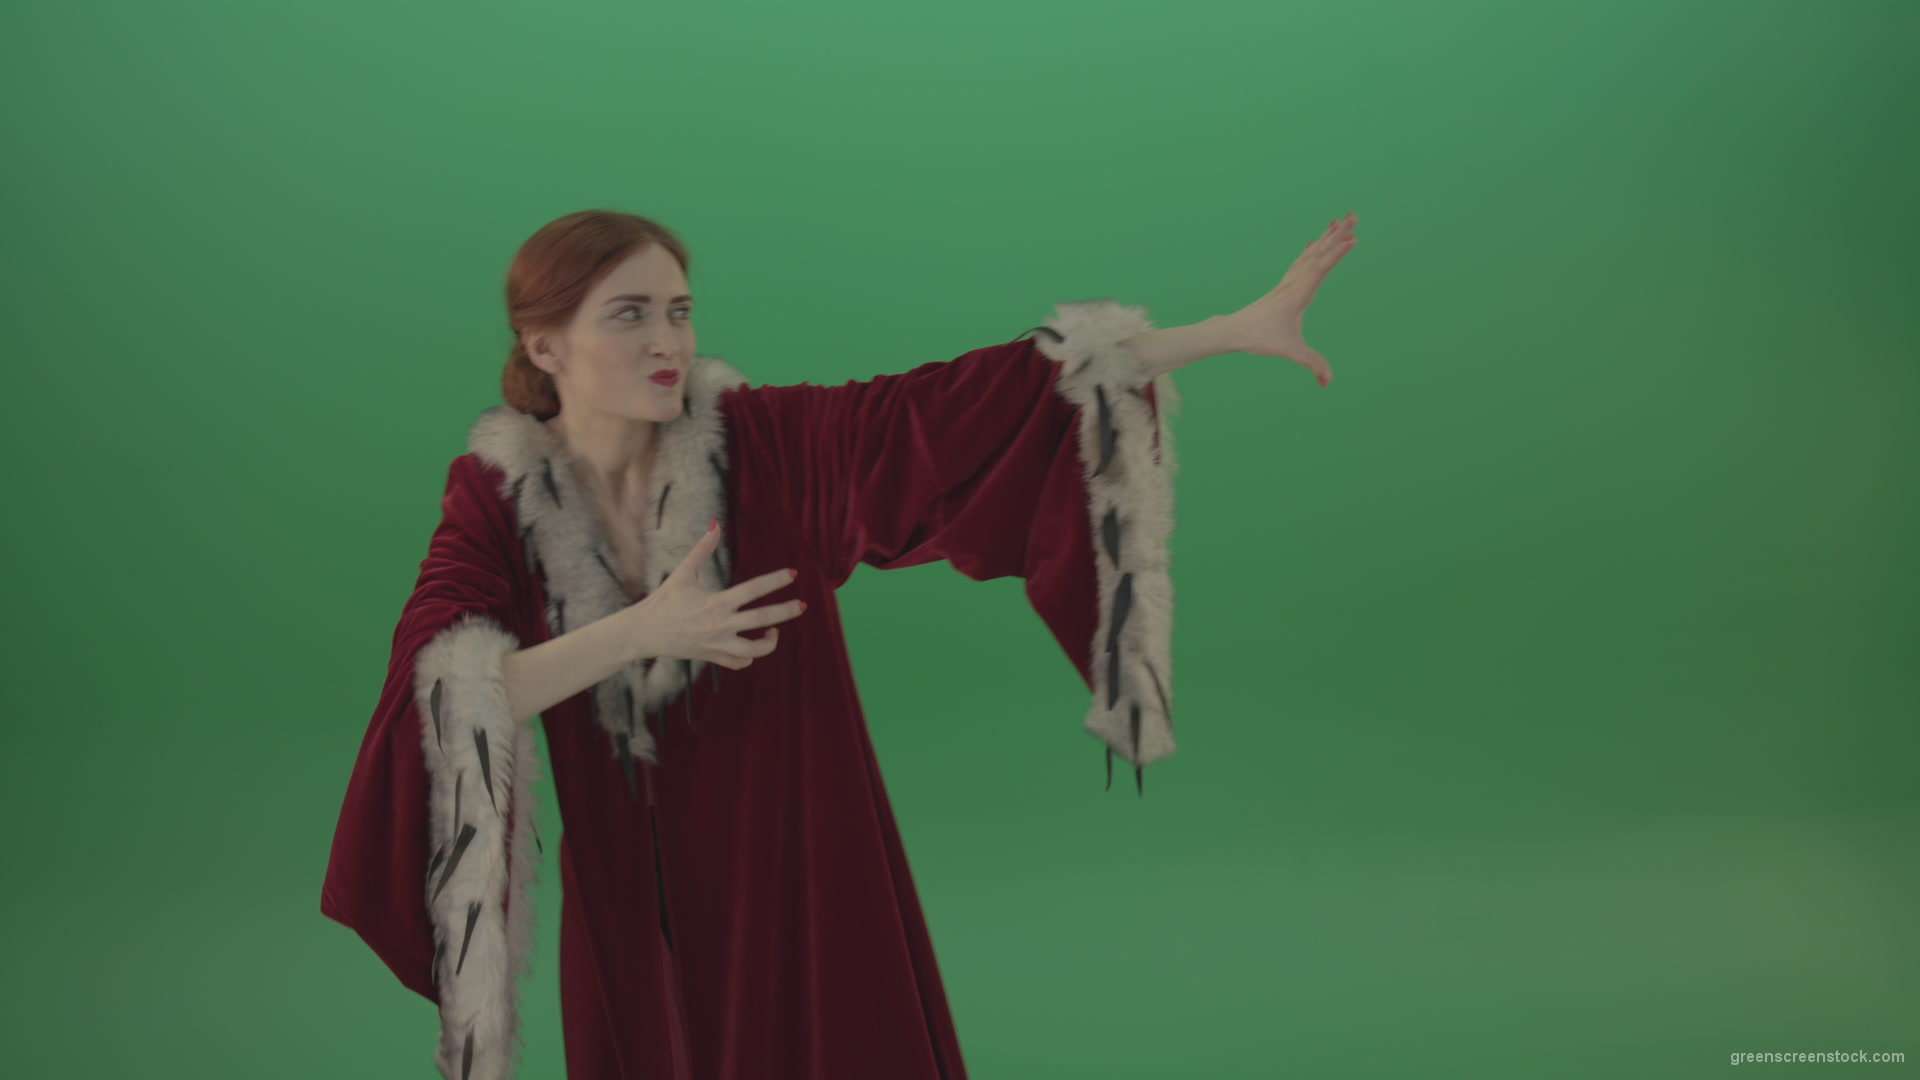 Girl-is-dressed-in-a-red-cloak-shoots-proton-lasers-_007 Green Screen Stock